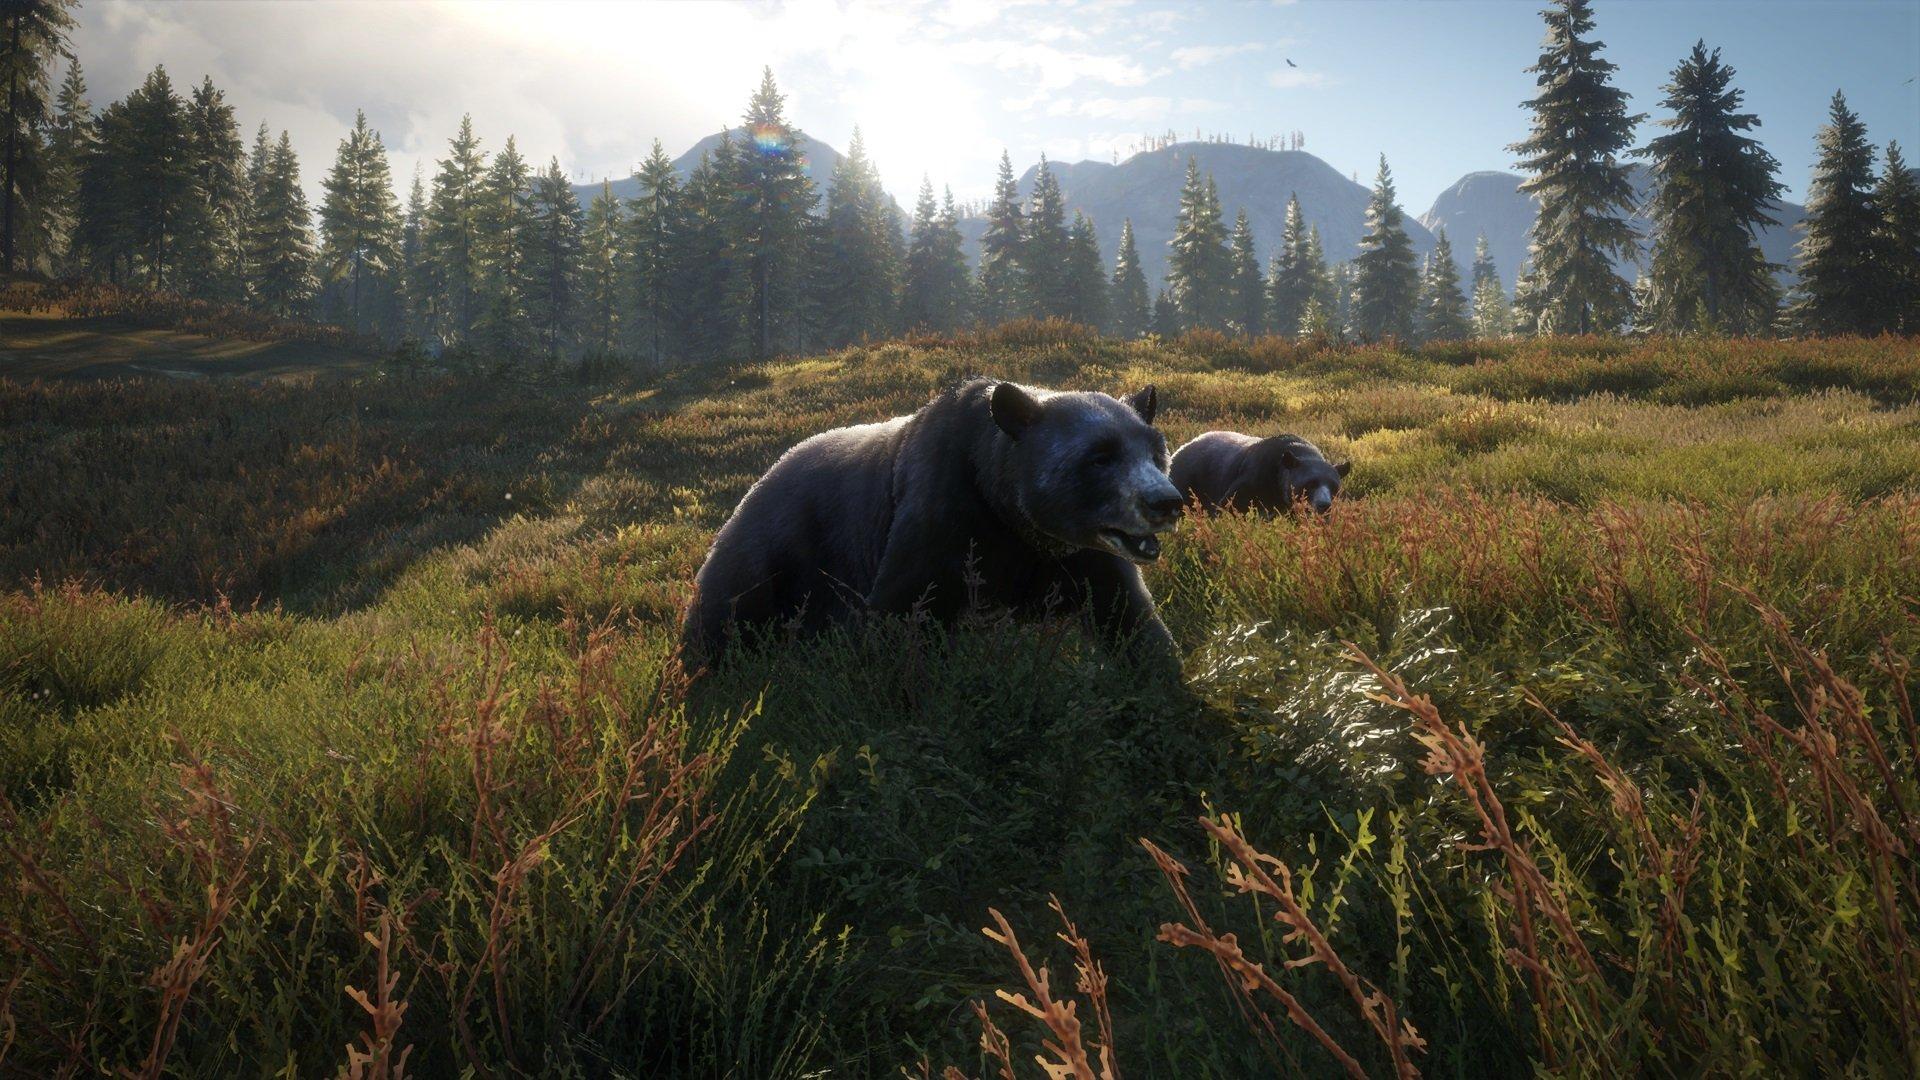 theHunter: Call of the Wild - Xbox One 